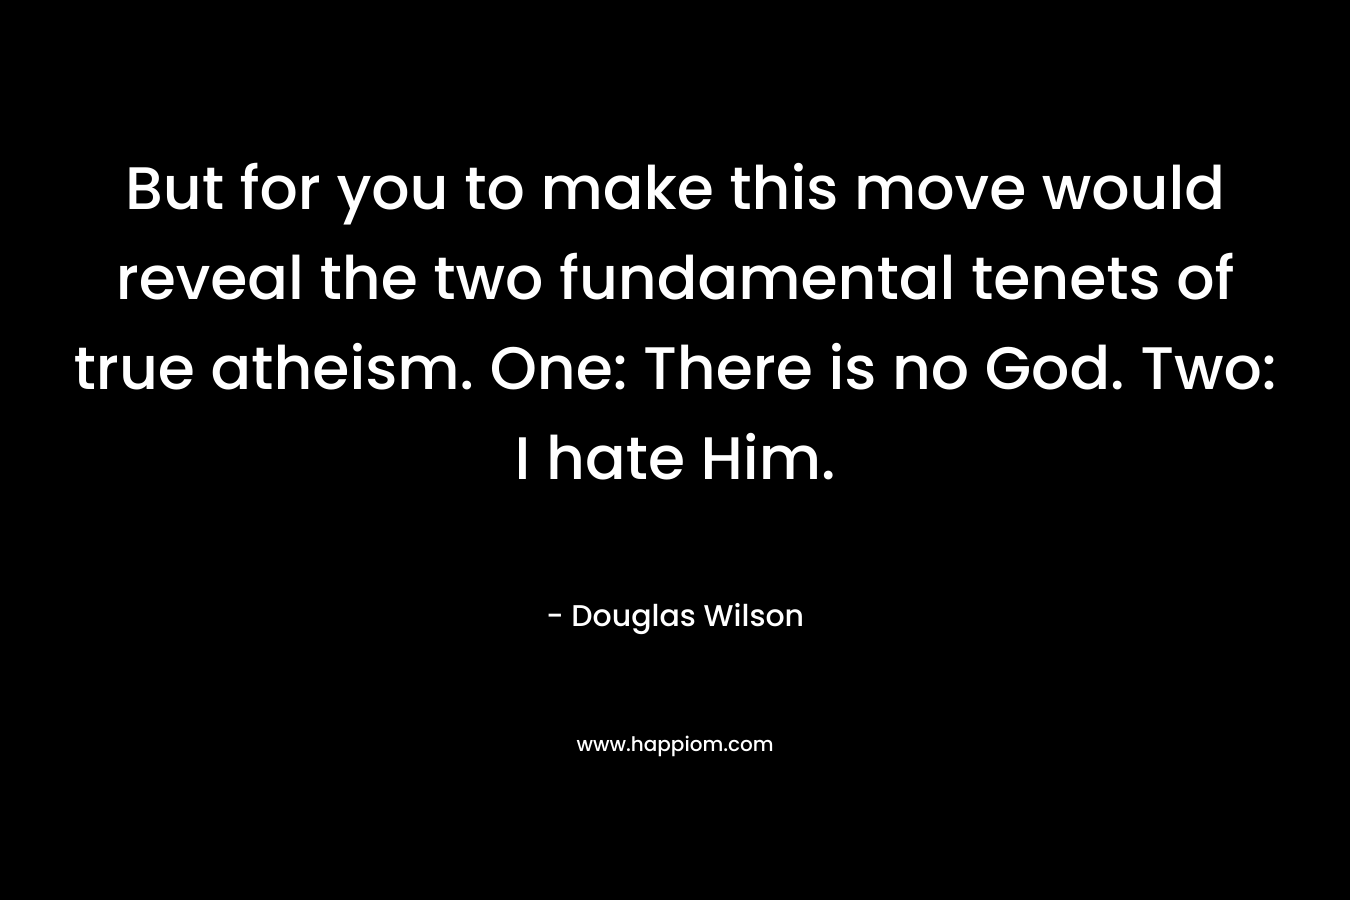 But for you to make this move would reveal the two fundamental tenets of true atheism. One: There is no God. Two: I hate Him. – Douglas Wilson